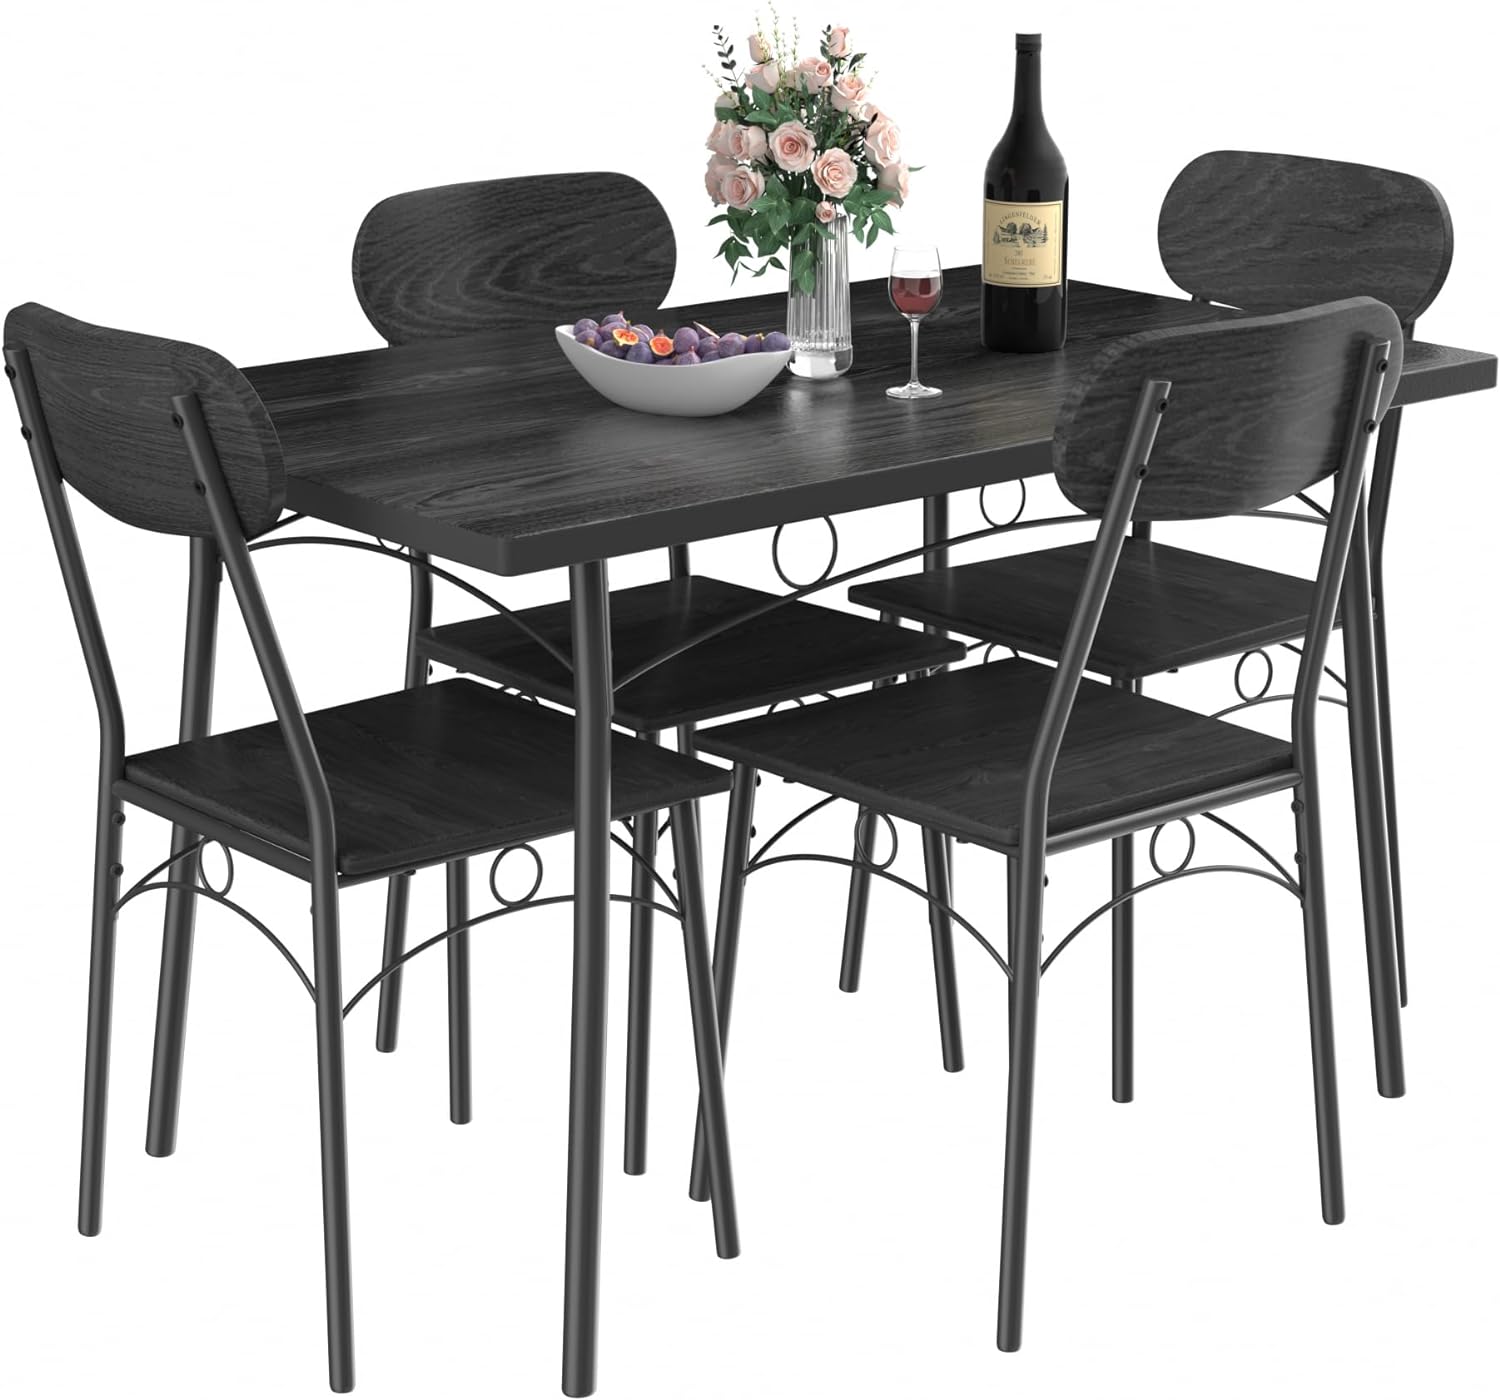 VECELO  Farmhouse Style 5 Piece Dining Table Set Metal and Wood Rectangular Table with 4 Chairs